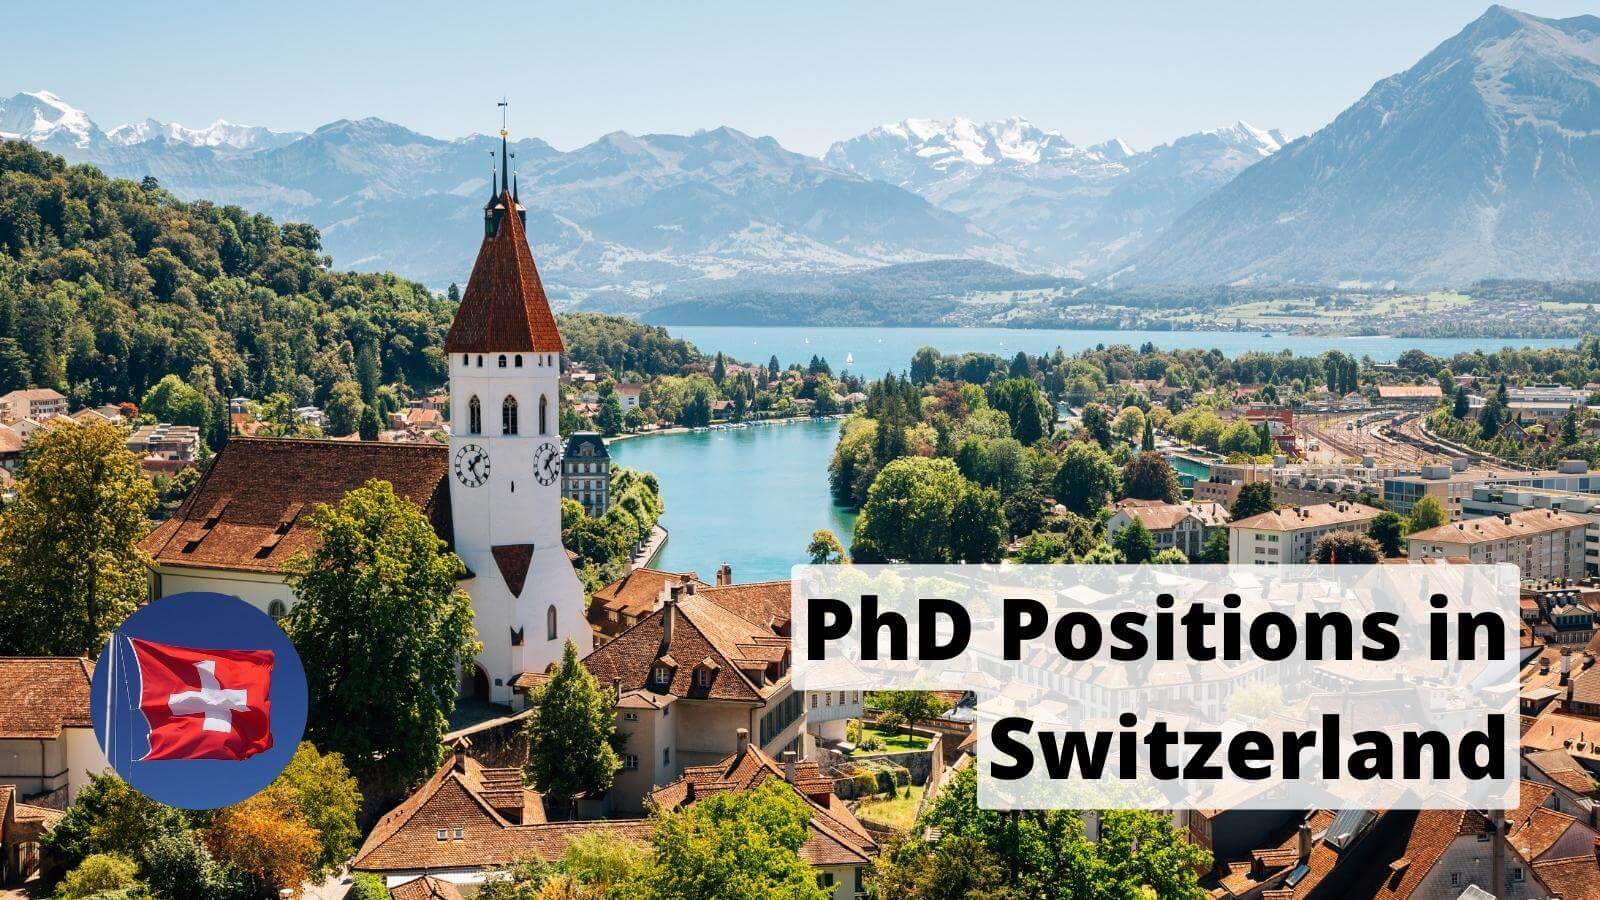 List Of Phd Positions In Switzerland Bacground Image Thun Cityspace With Alps Mountain And Lake In Switzerland